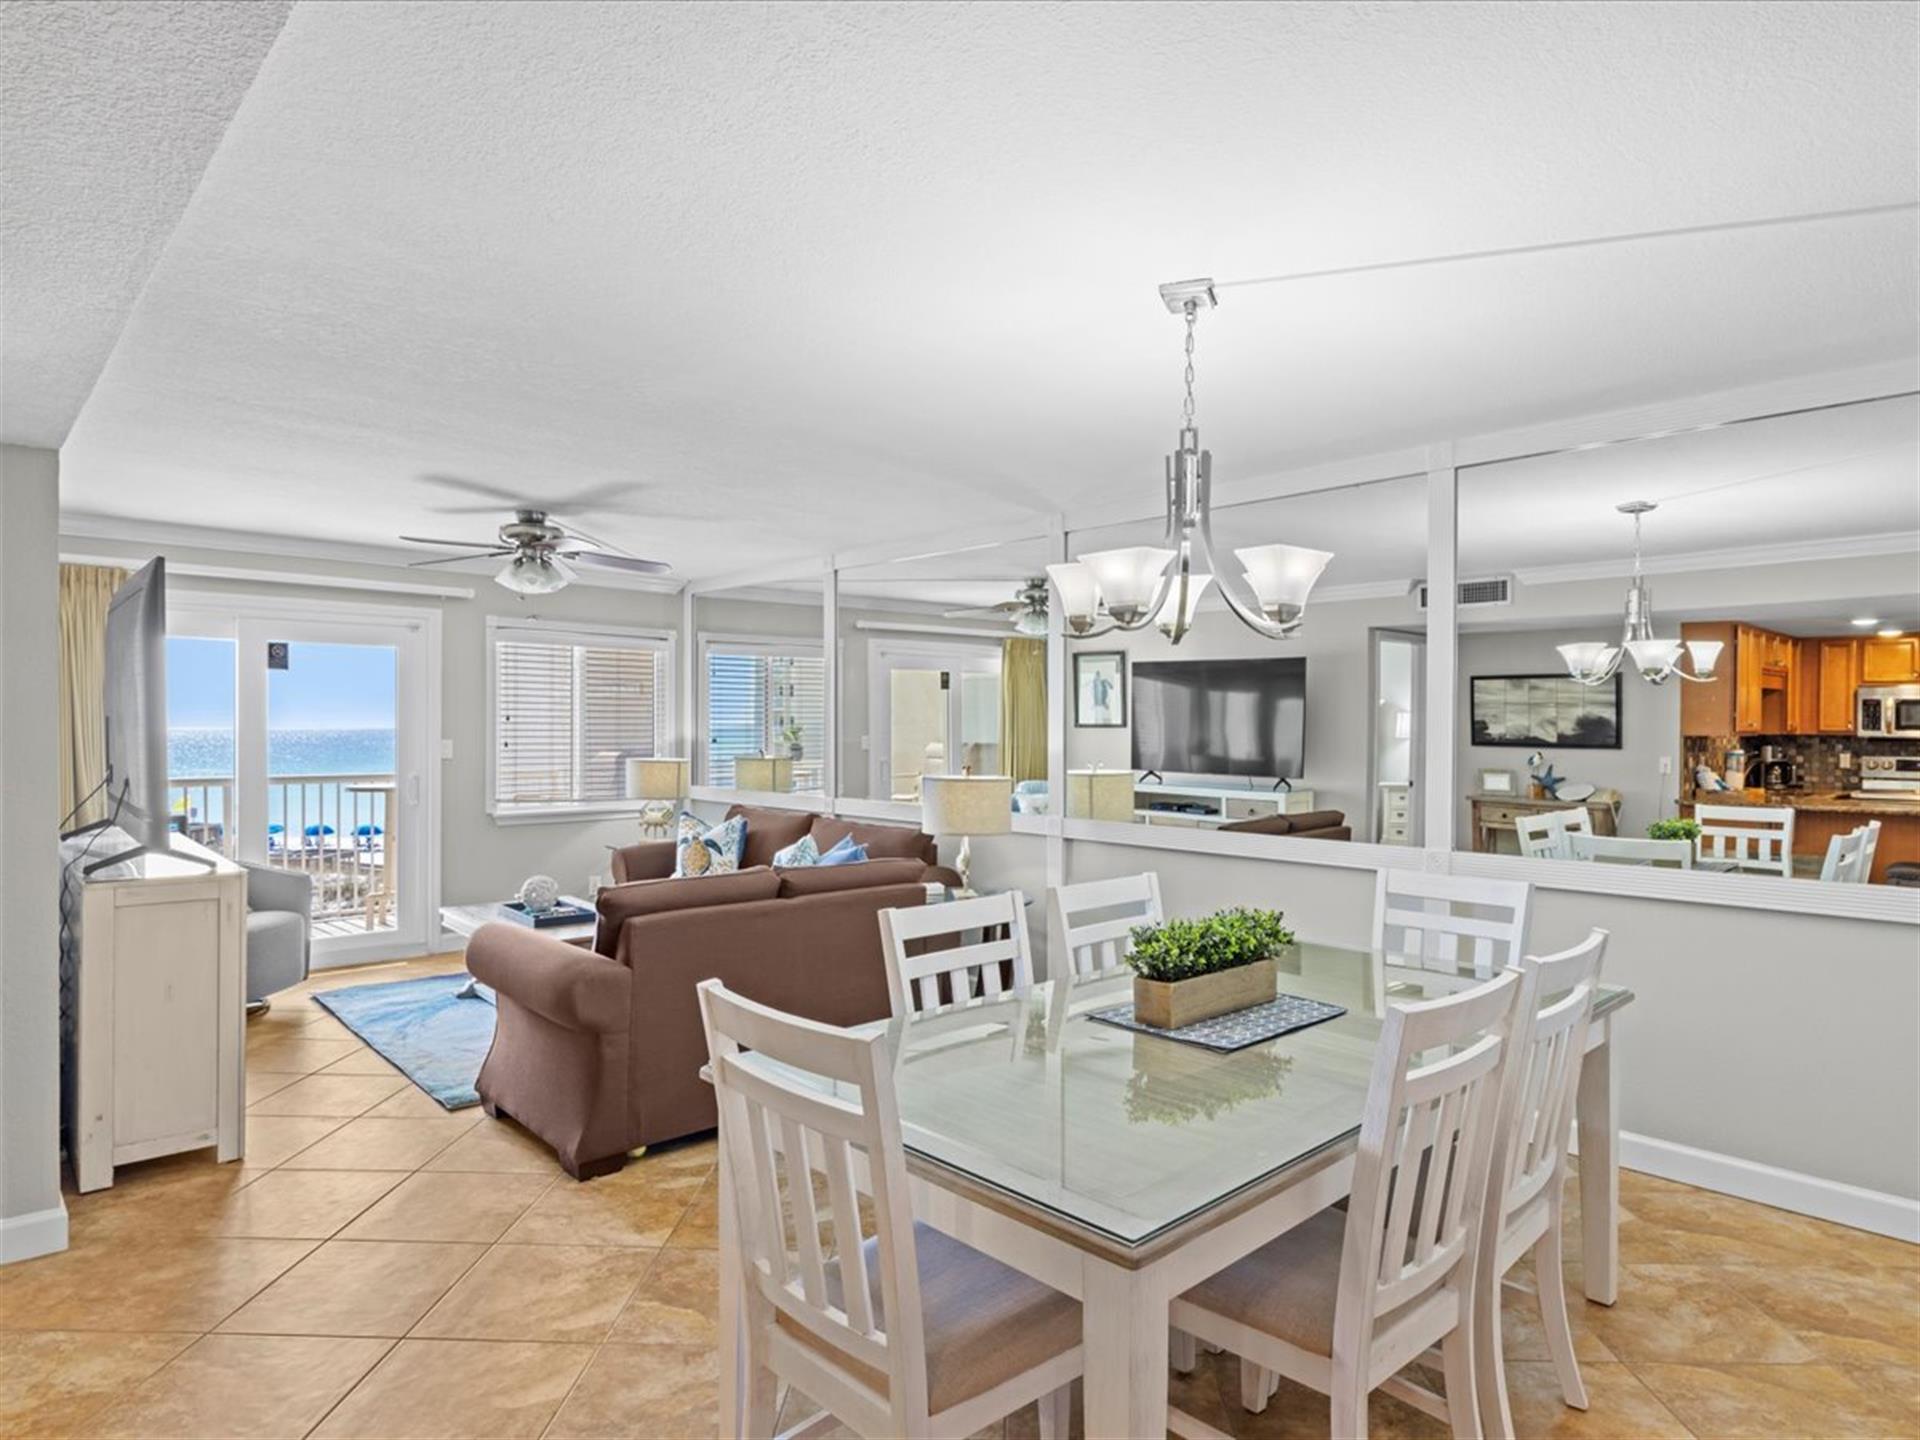 HSRC 304 DiningLiving Area With Gulf View